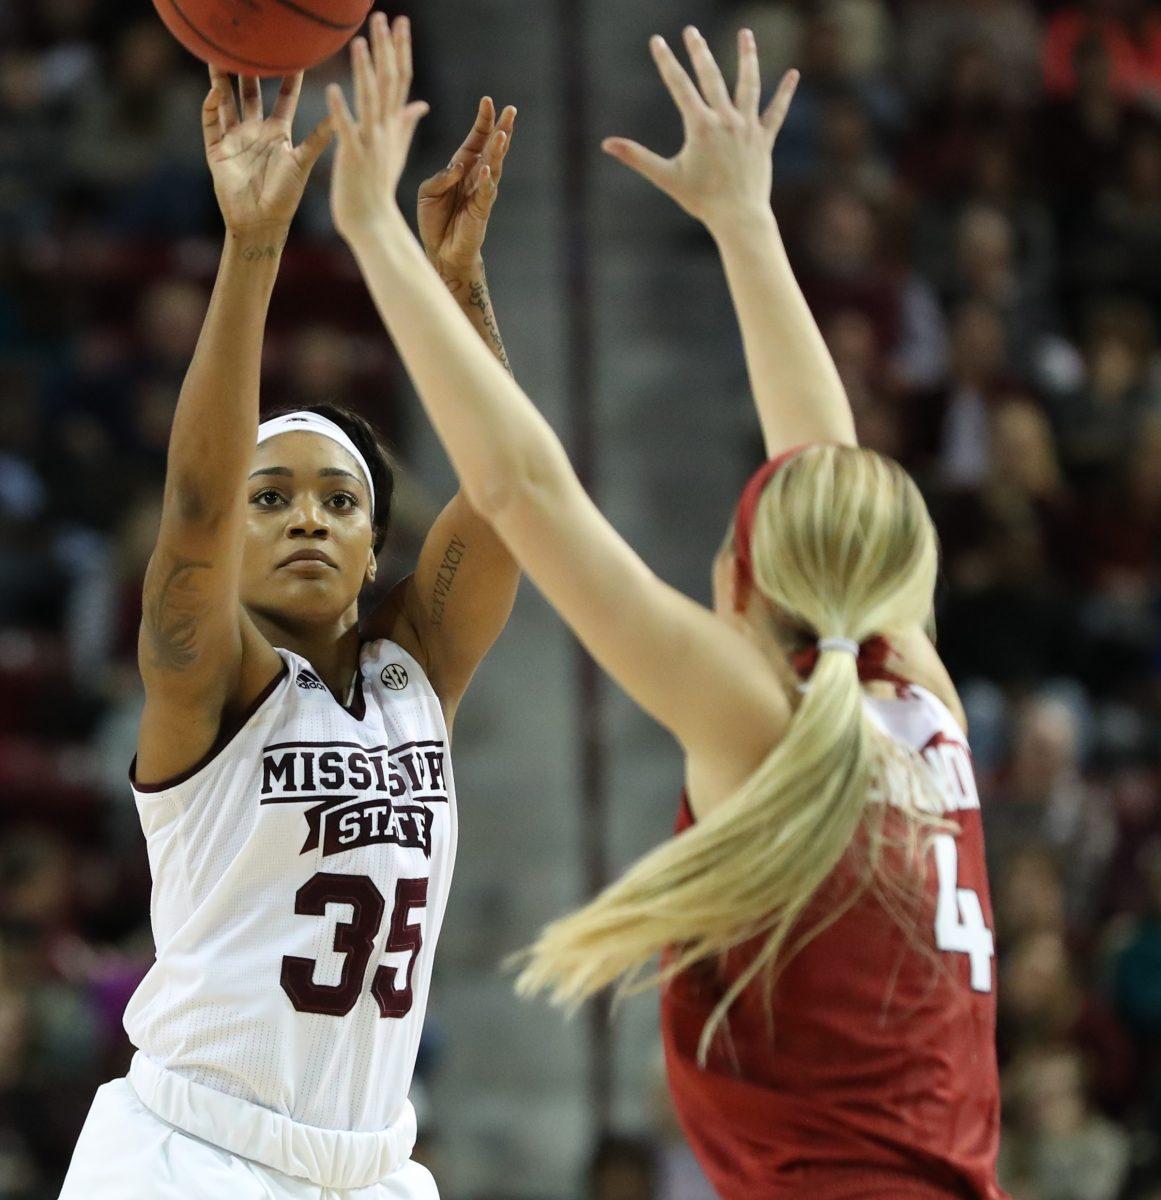 Victoria+Vivians%2C+a+senior+from+Carthage%2C+led+MSU+in+scoring+with+29+points+in+MSUs+111-69+rout+of+Arkansas.+She+was+honored+before+the+game+for+reaching+2%2C000+career+points+earlier+in+the+season.